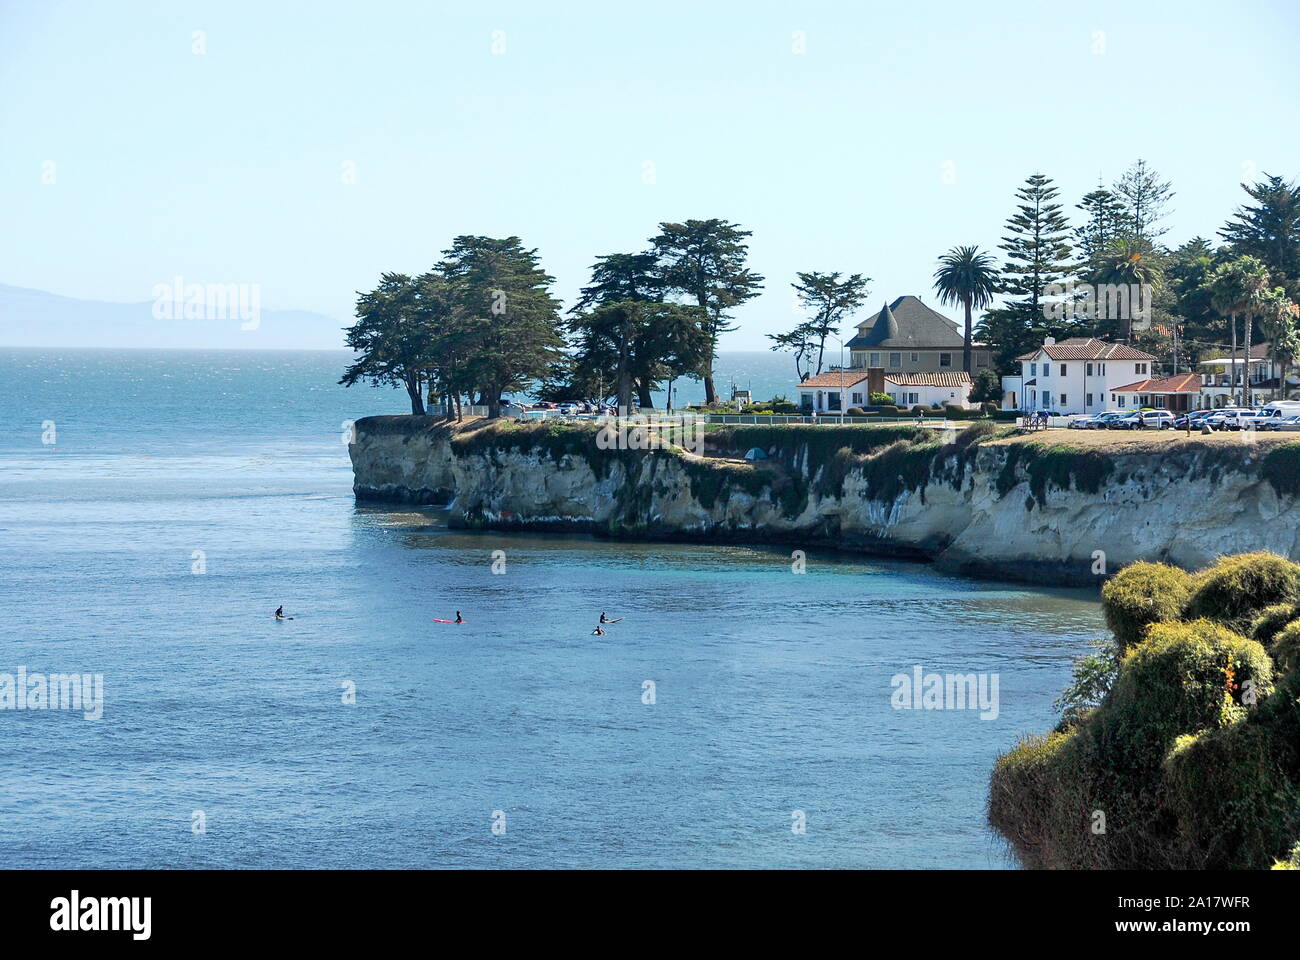 Surfers below West Cliff Drive with its houses and cliff above Cowell Beach in the City of Santa Cruz on Monterey Bay, California Stock Photo